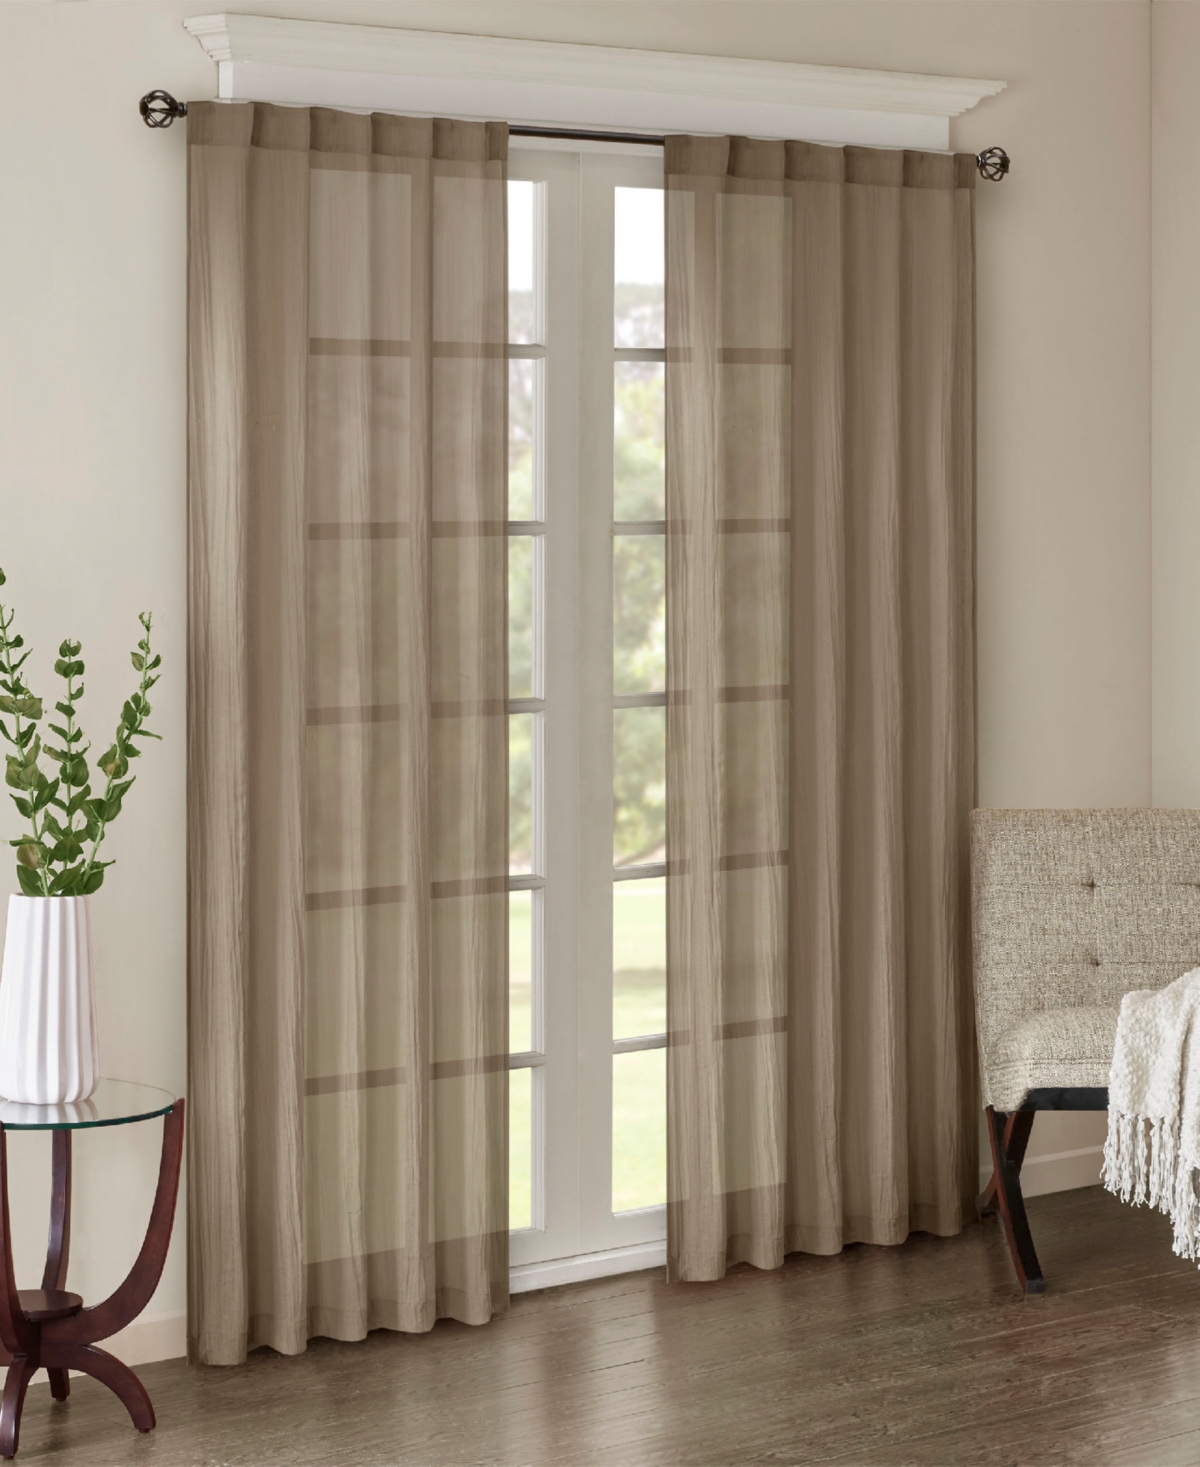 Harper Solid Crushed Curtain Panel Pair, 42"W x 95"L - Taupe